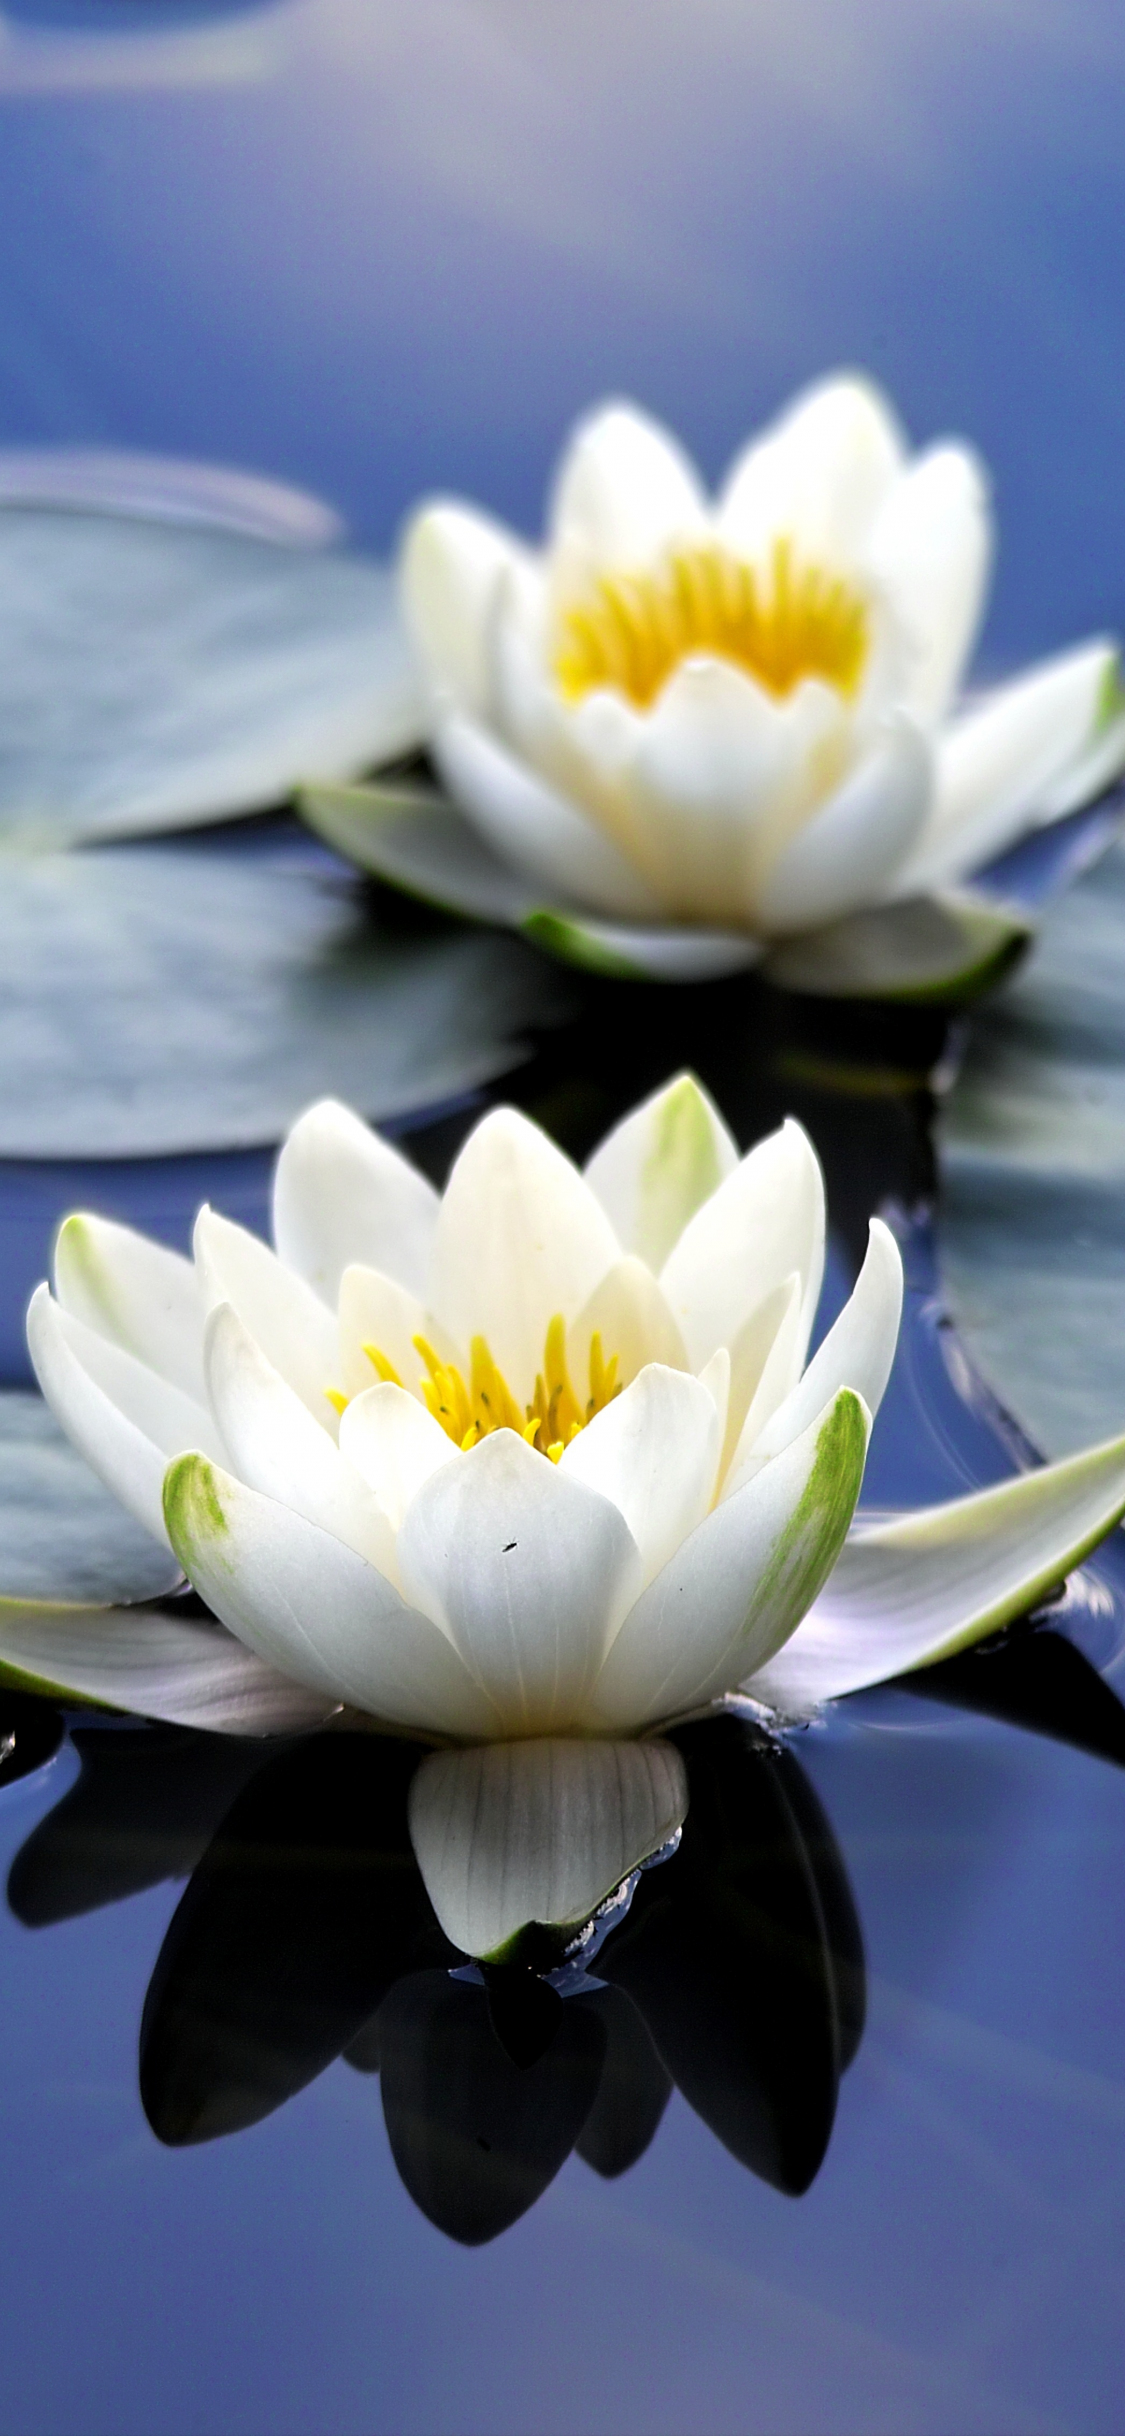 Download wallpaper 1125x2436 flora, white flowers, close up, bloom, water  lily, iphone x, 1125x2436 hd background, 19022